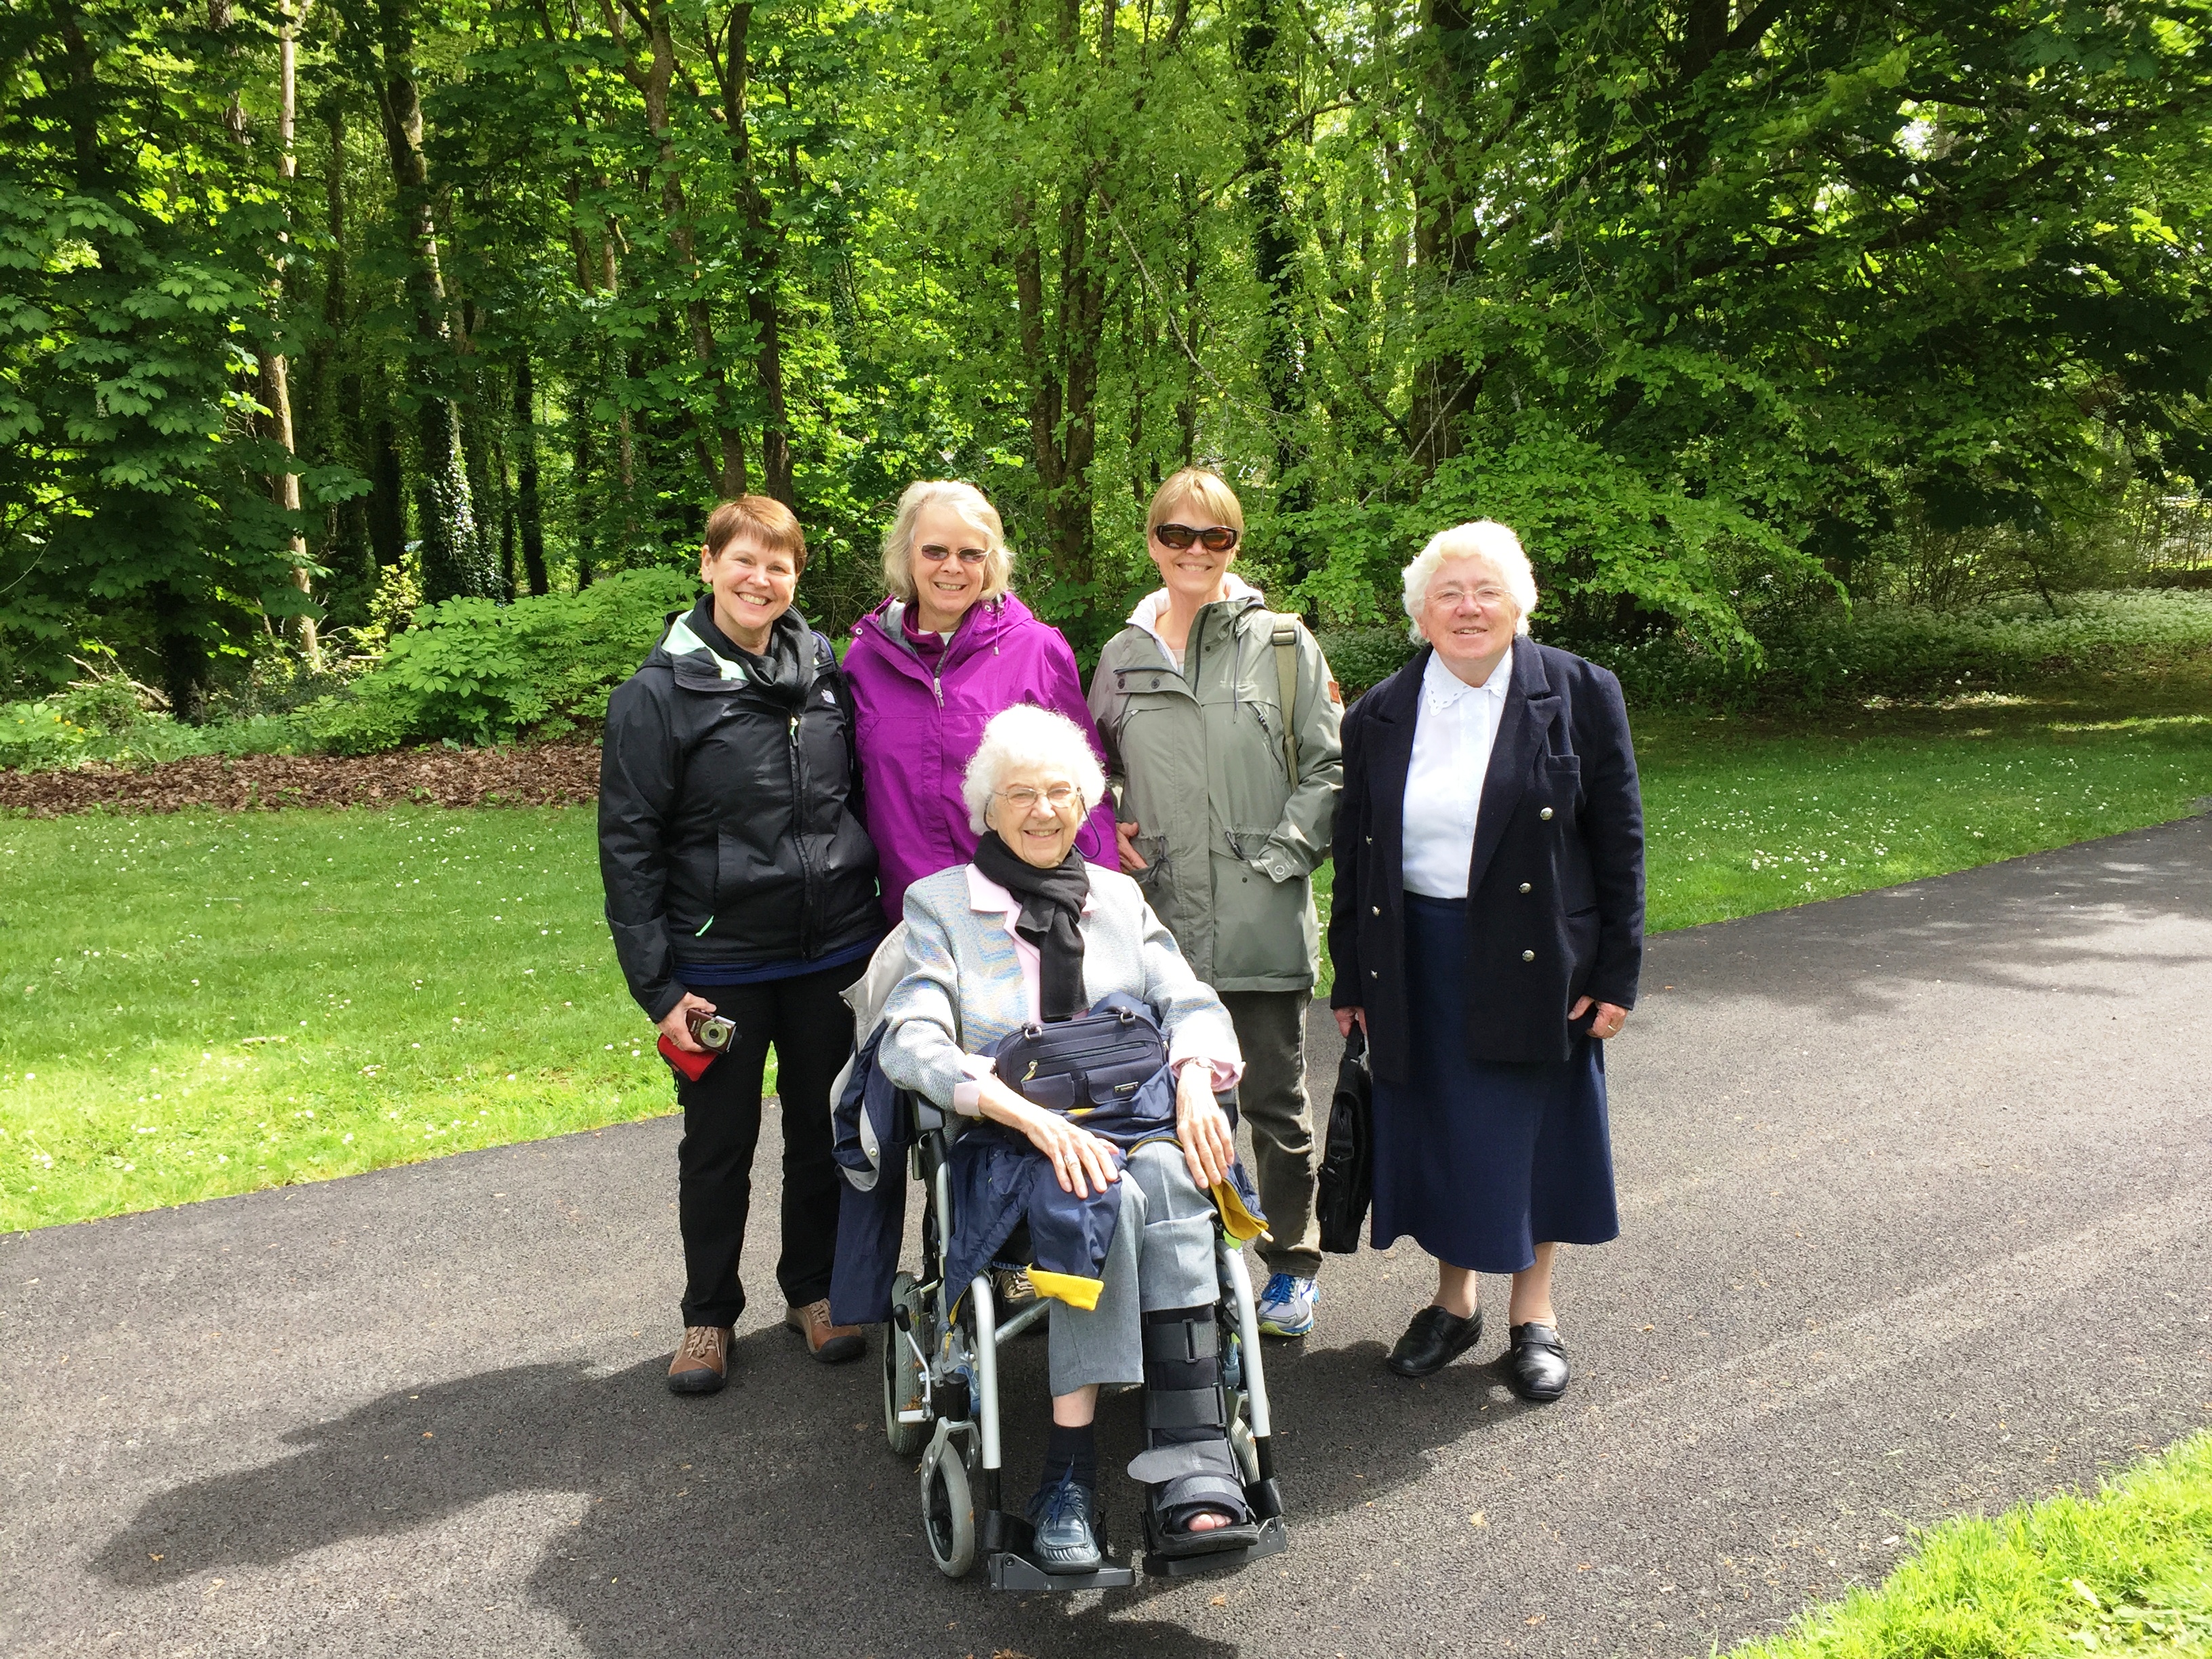 Molly Daniel, Annis Householder, Sara Burrus, Sister DeLourdes Fahy and Roberta Clark (in front) at Coole Park. Photo by Martha Clark.